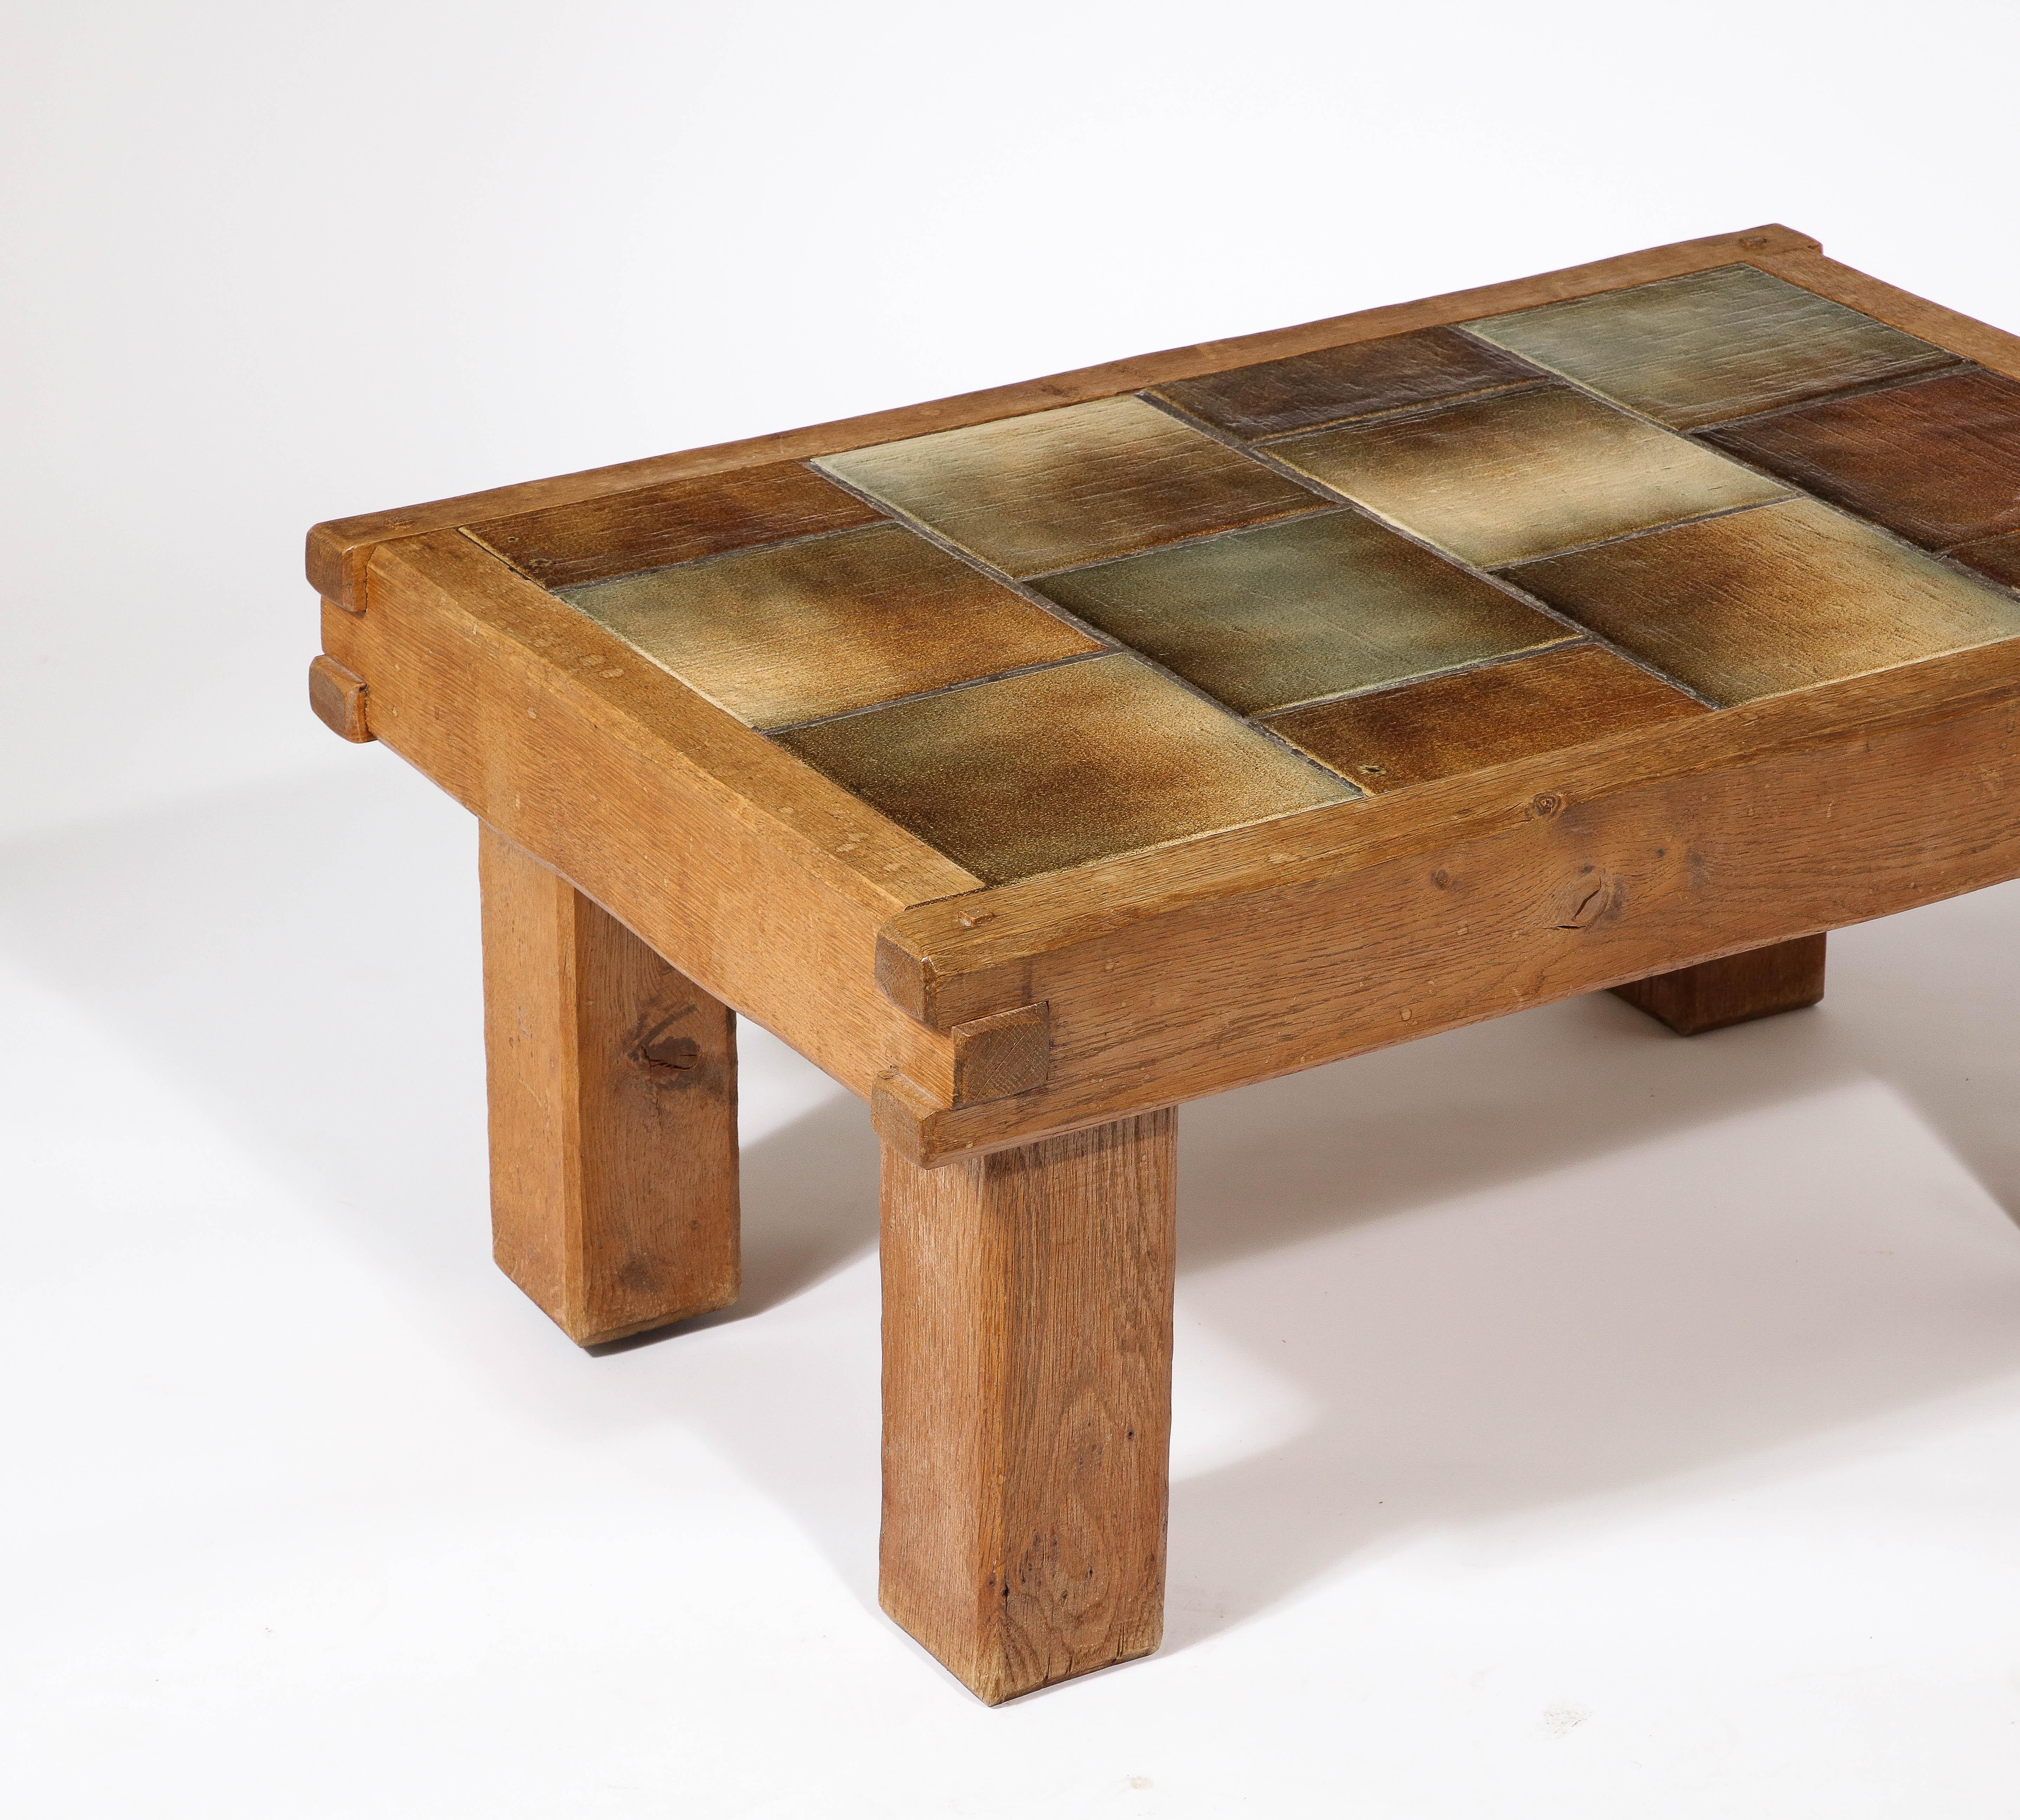 Small Brutalist Coffee Table with Ceramic Tile Top & Oak, France 1960's For Sale 10